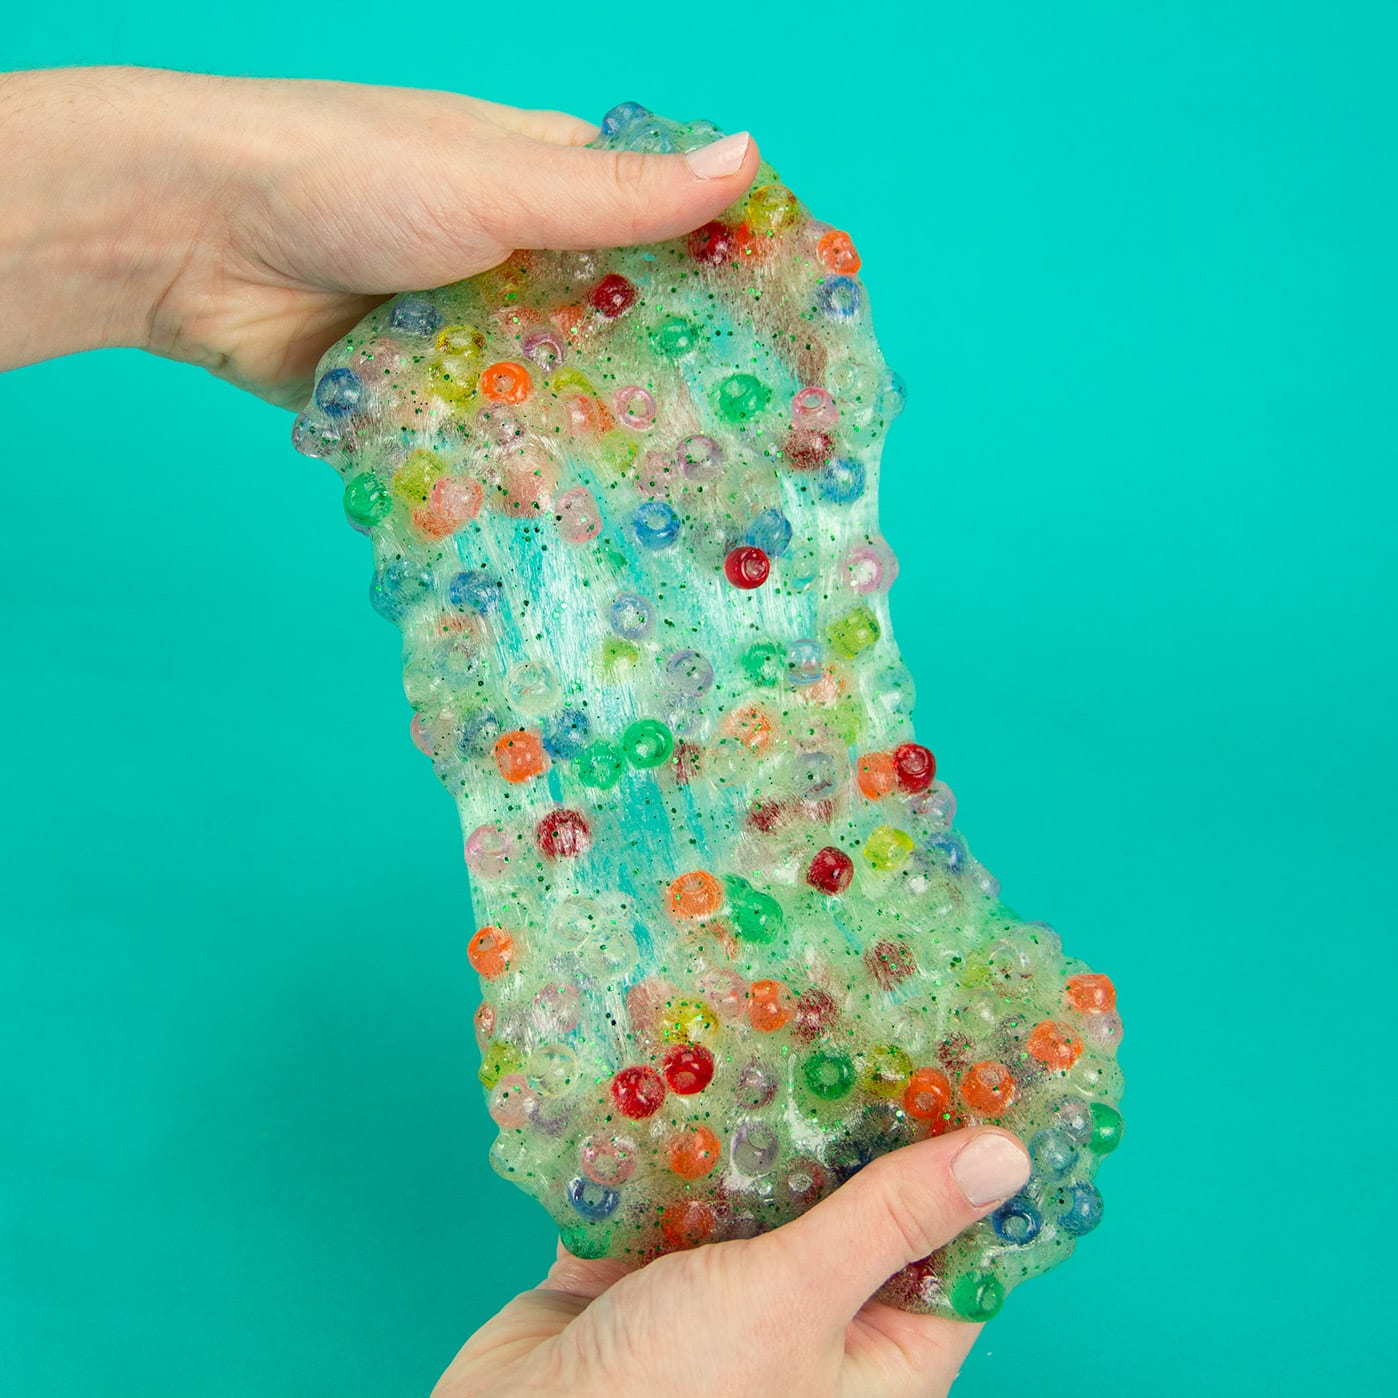 Crunchy Slime, Projects